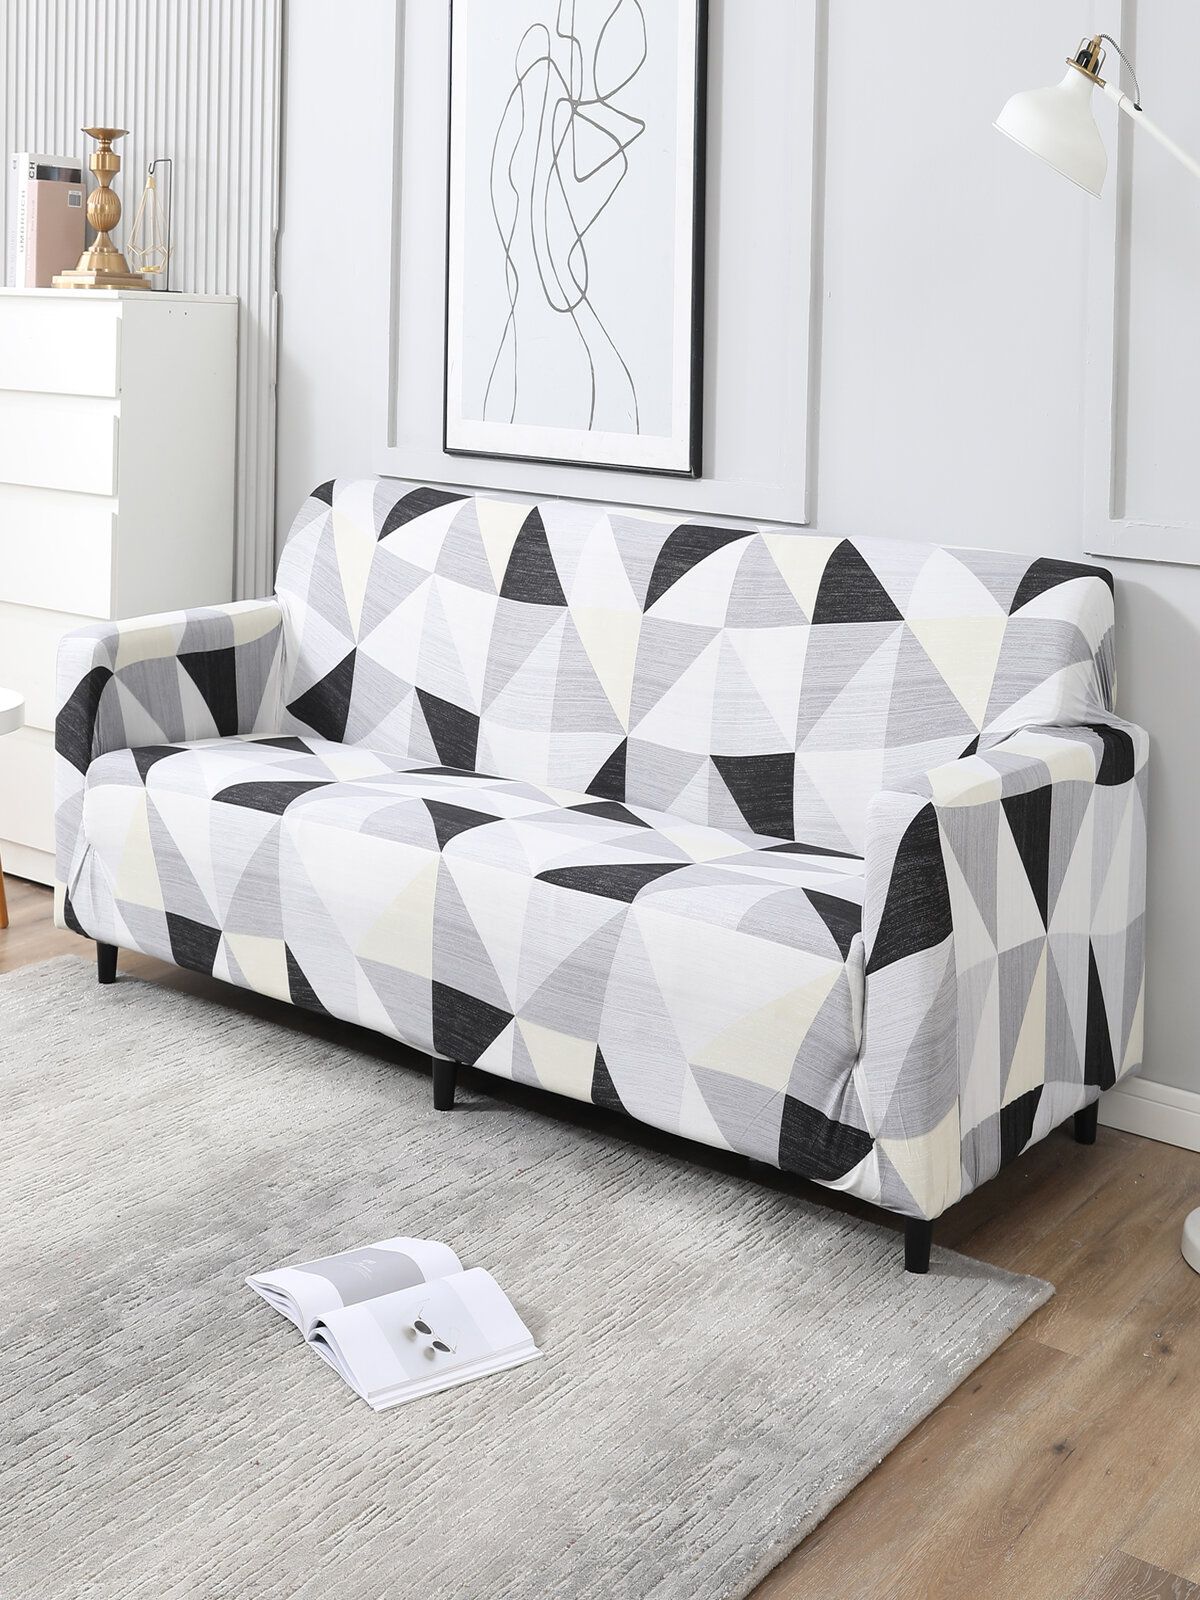     			HOKIPO 4 Seater Polyester Sofa Cover ( Pack of 1 )